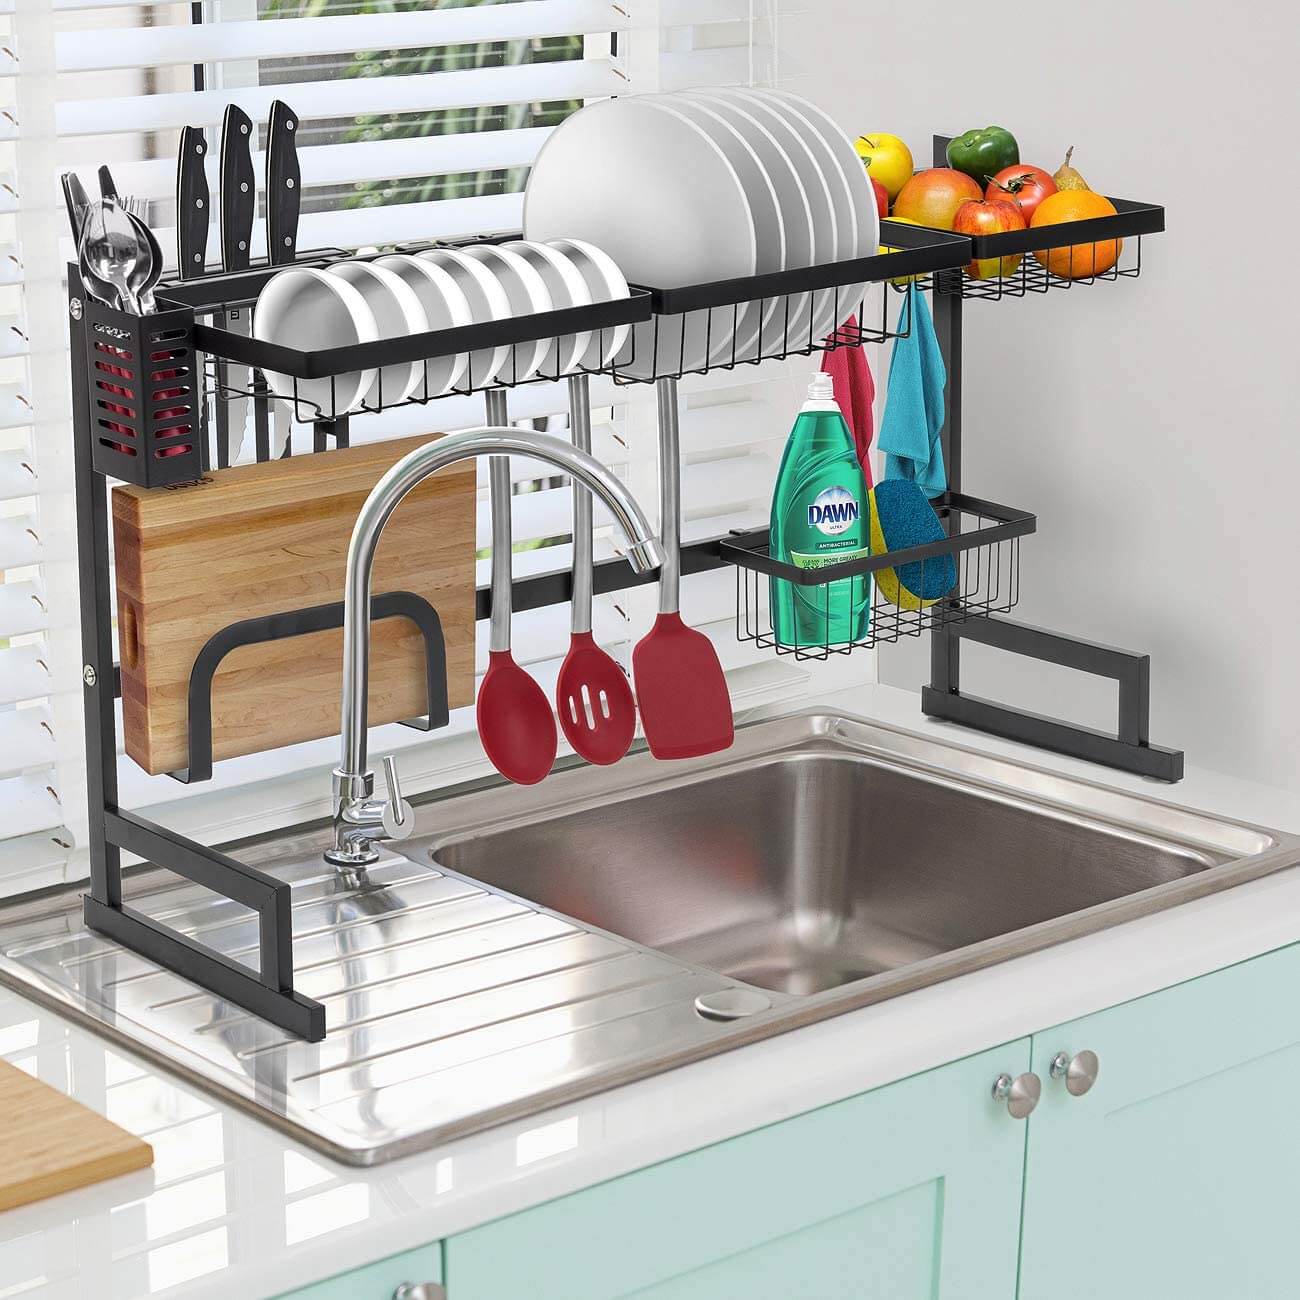 Dish Drying Rack Over Sink Kitchen Supplies - The Shopsite